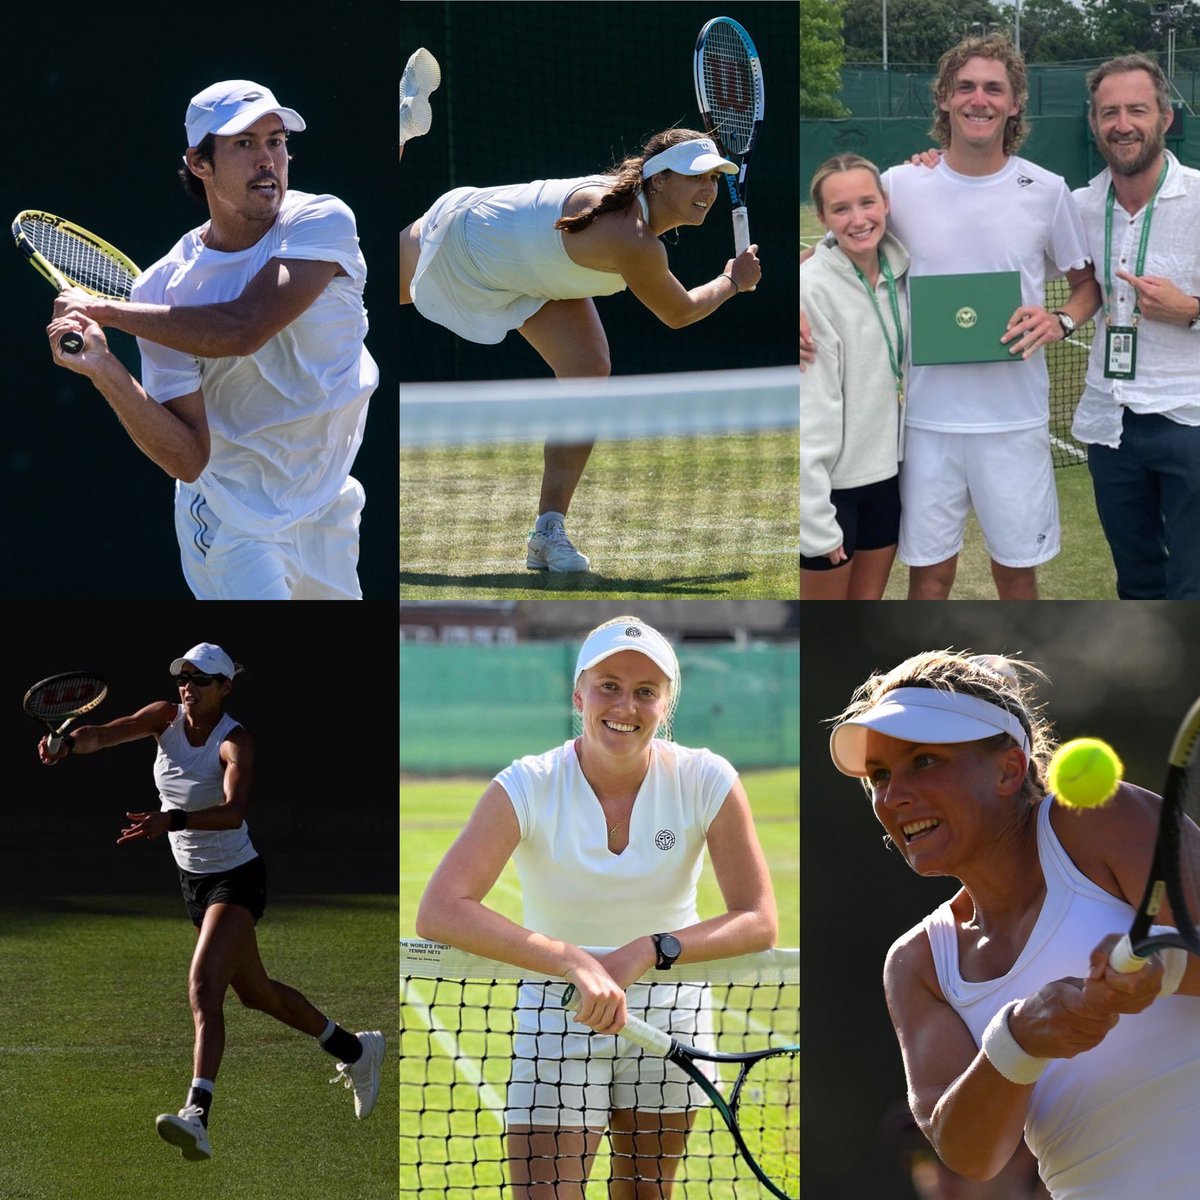 Today is a historic day for Australia in #Wimbledon qualifying, with Jason Kubler, Max Purcell, Astra Sharma, Jaimee Fourlis, Zoe Hives & Maddison Inglis all qualifying for the #Wimbledon main draw. 👏